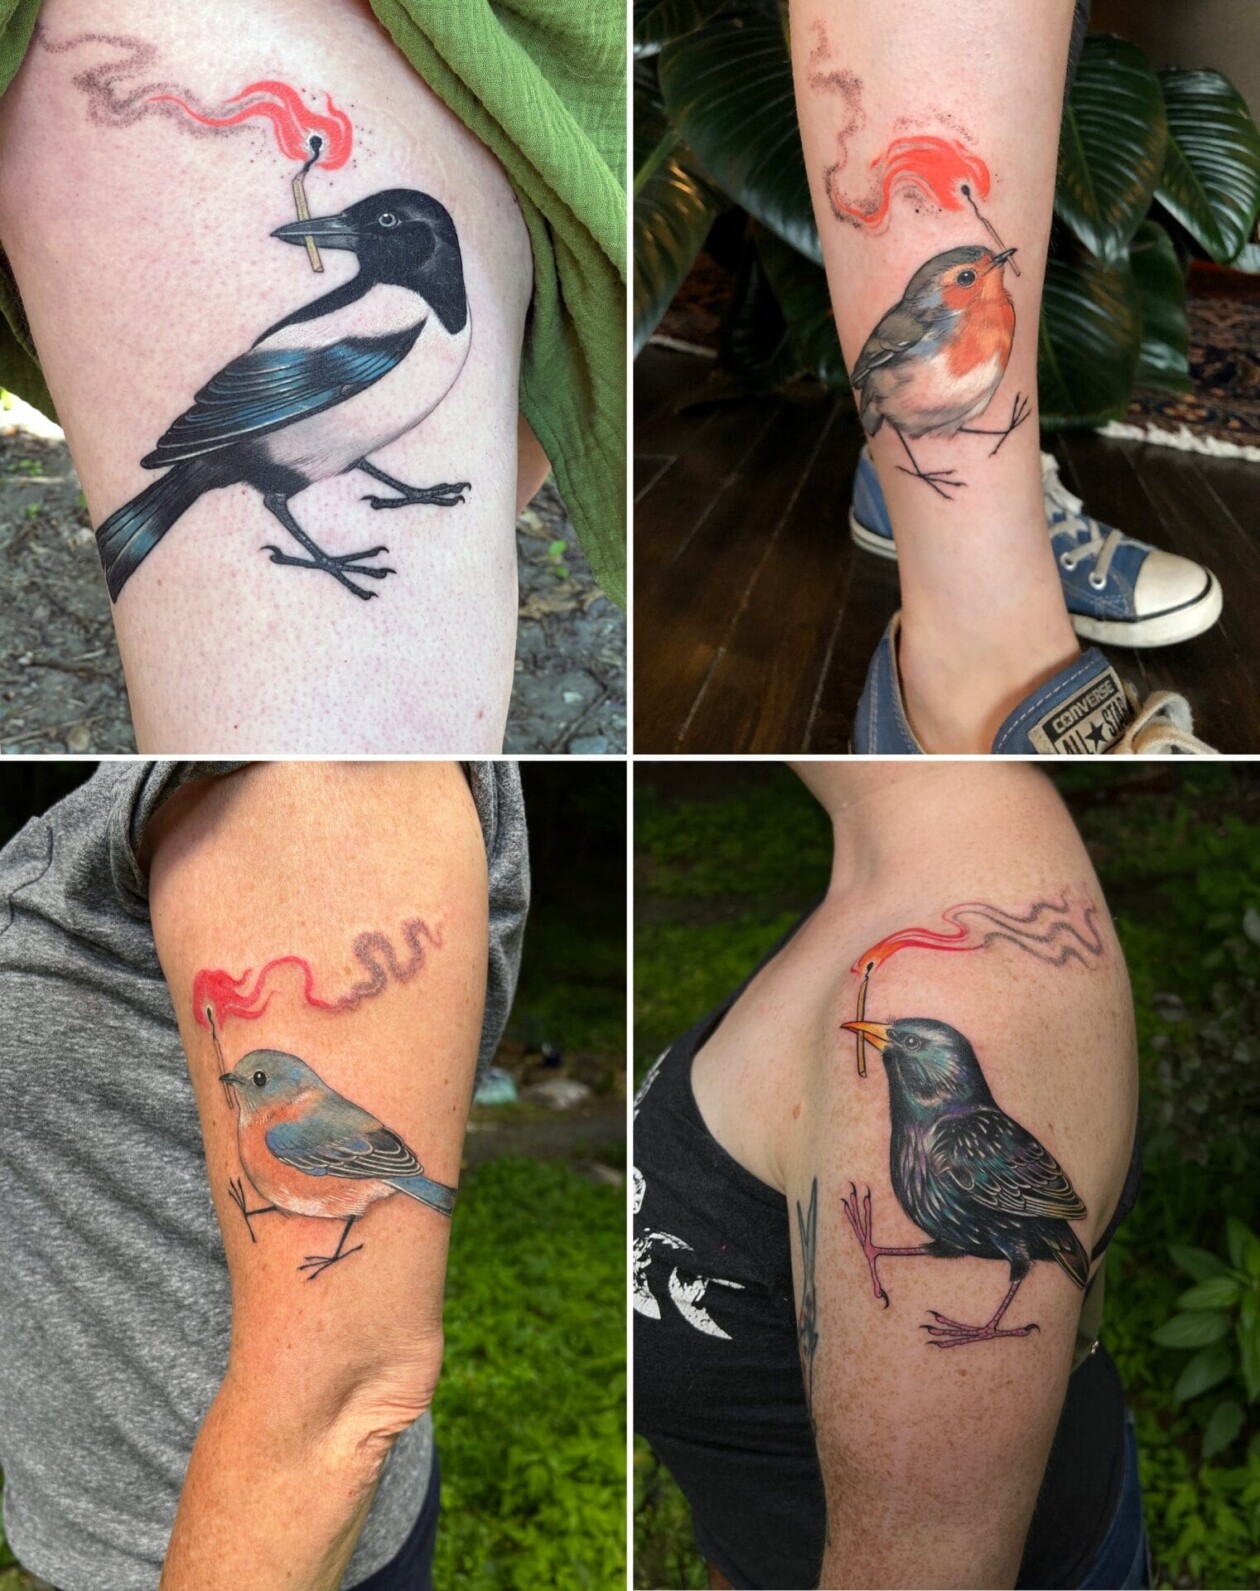 Stephanie Brown Creates Whimsical Tattoos Of Birds Holding A Lit Match Symbolizing Hope For A Better Future (13)